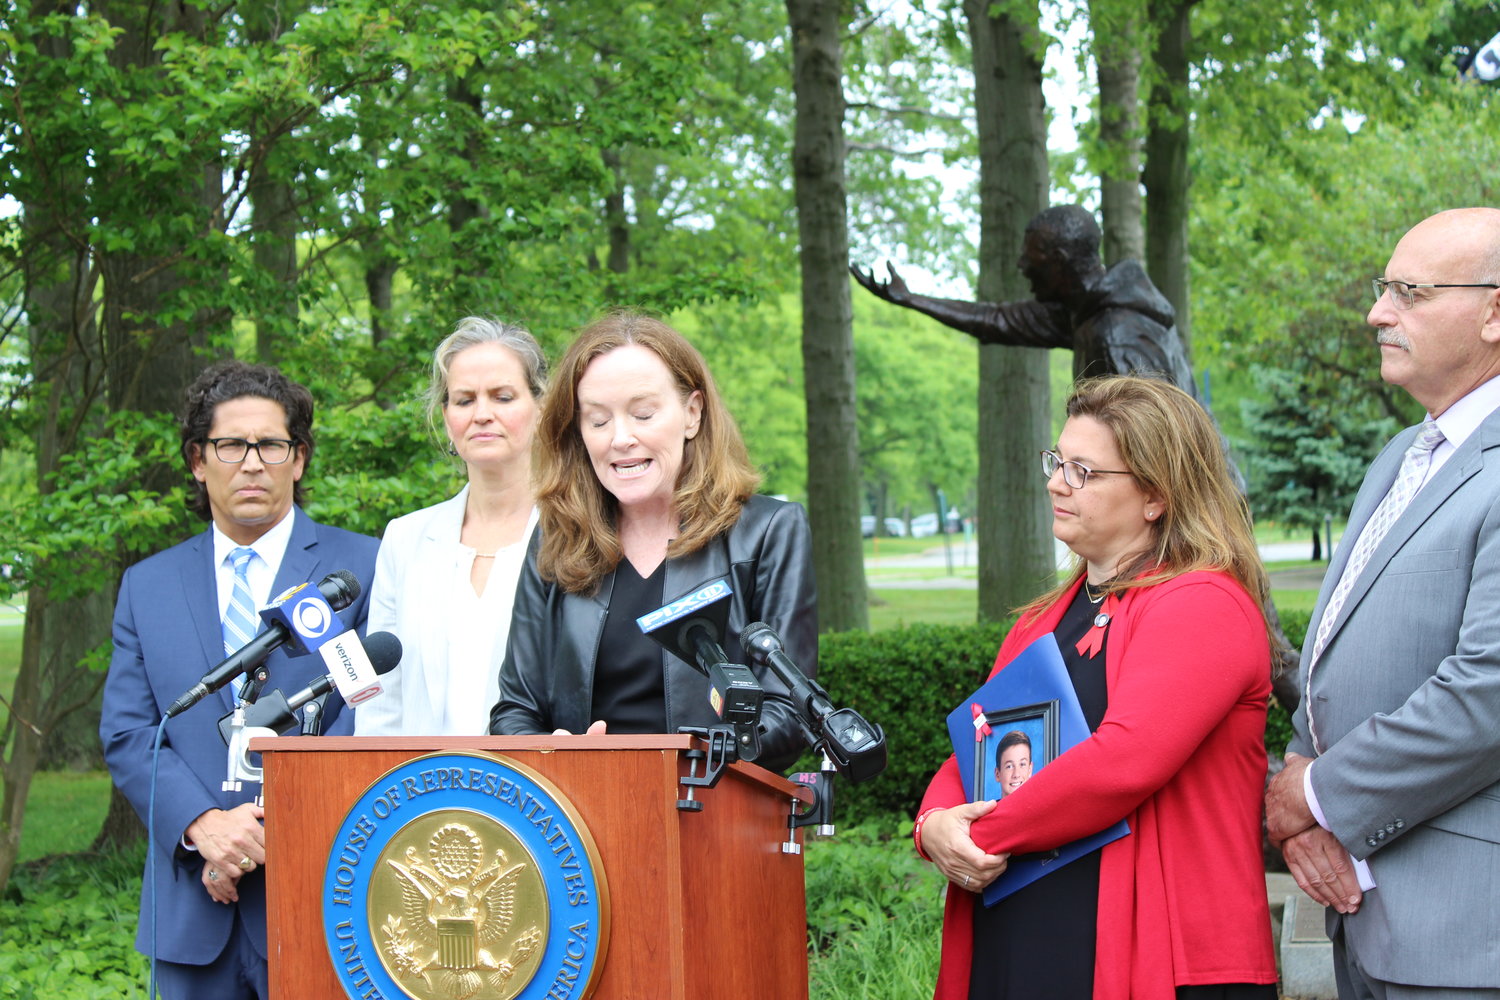 Rep. Kathleen Rice introduced three bills to combat impaired and distracted driving on May 30 at Eisenhower Park. She was with Steve Chassman, the executive director of Long Island Council on Alcoholism & Drug Dependence, Nassau County Executive Laura Curran, Alisa McMorris, of Wading River, and Richard Mallow, the executive director of Mothers Against Drunk Driving.